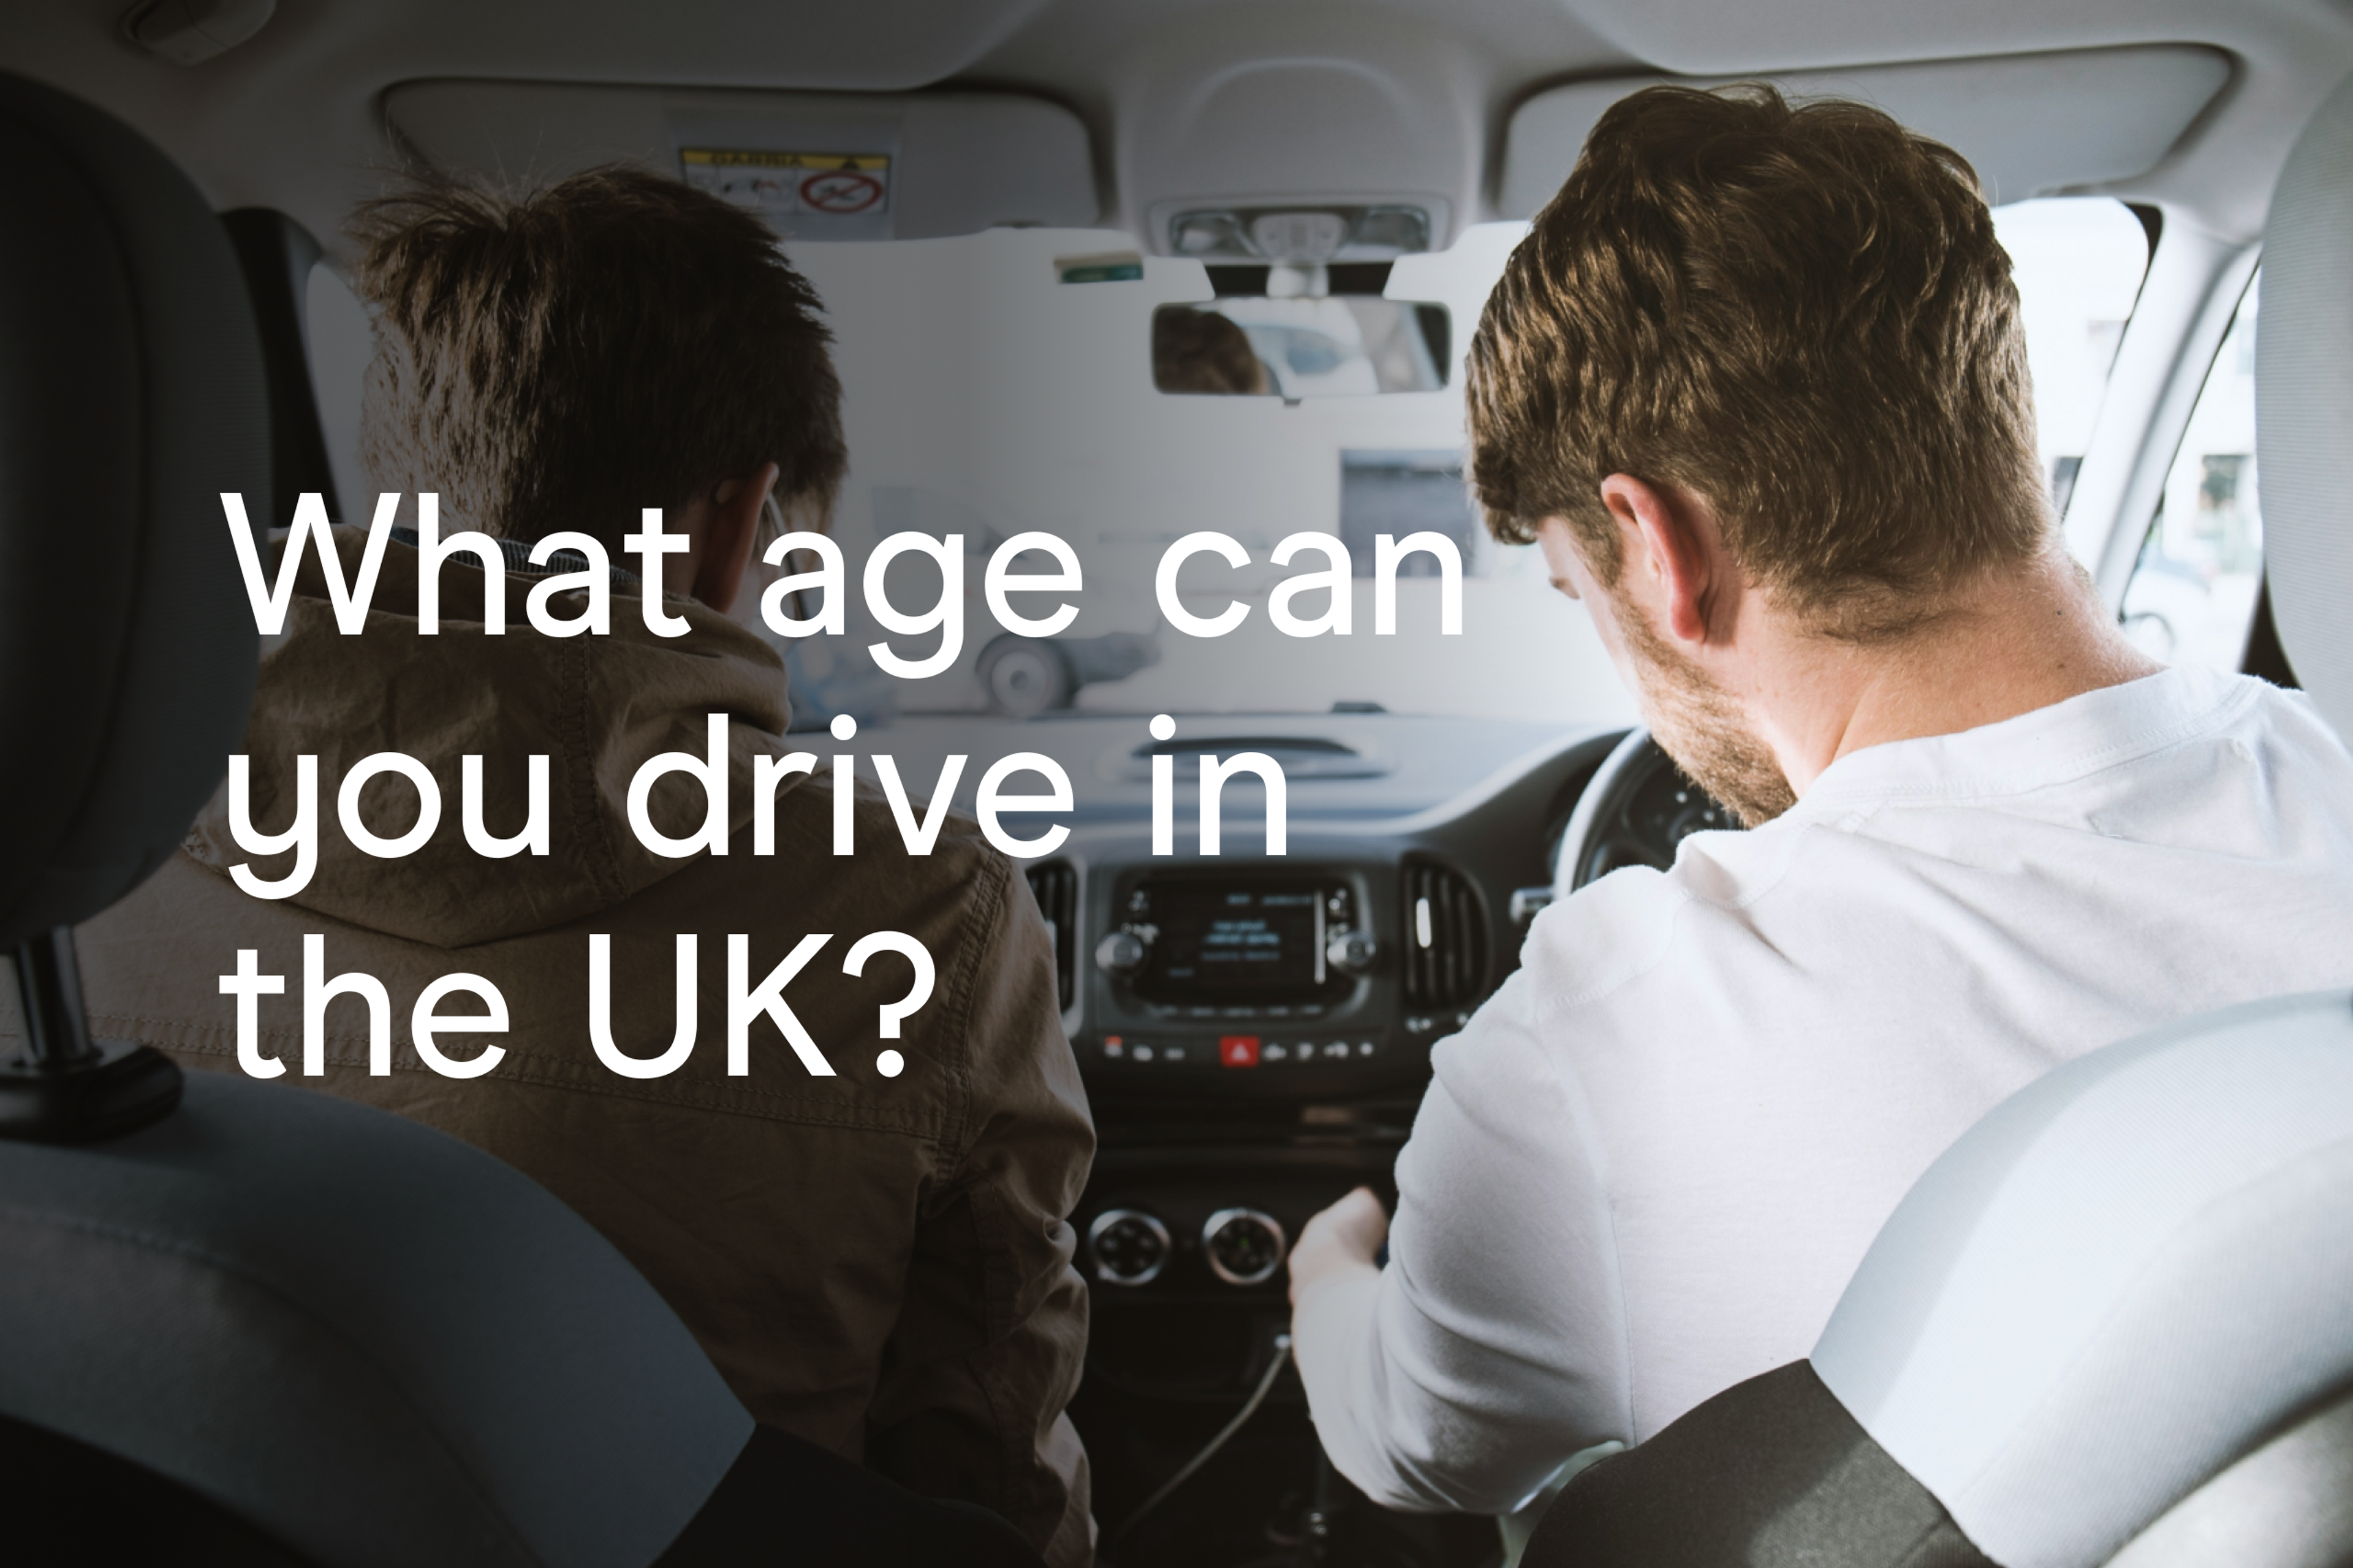 What age can you drive in the UK?